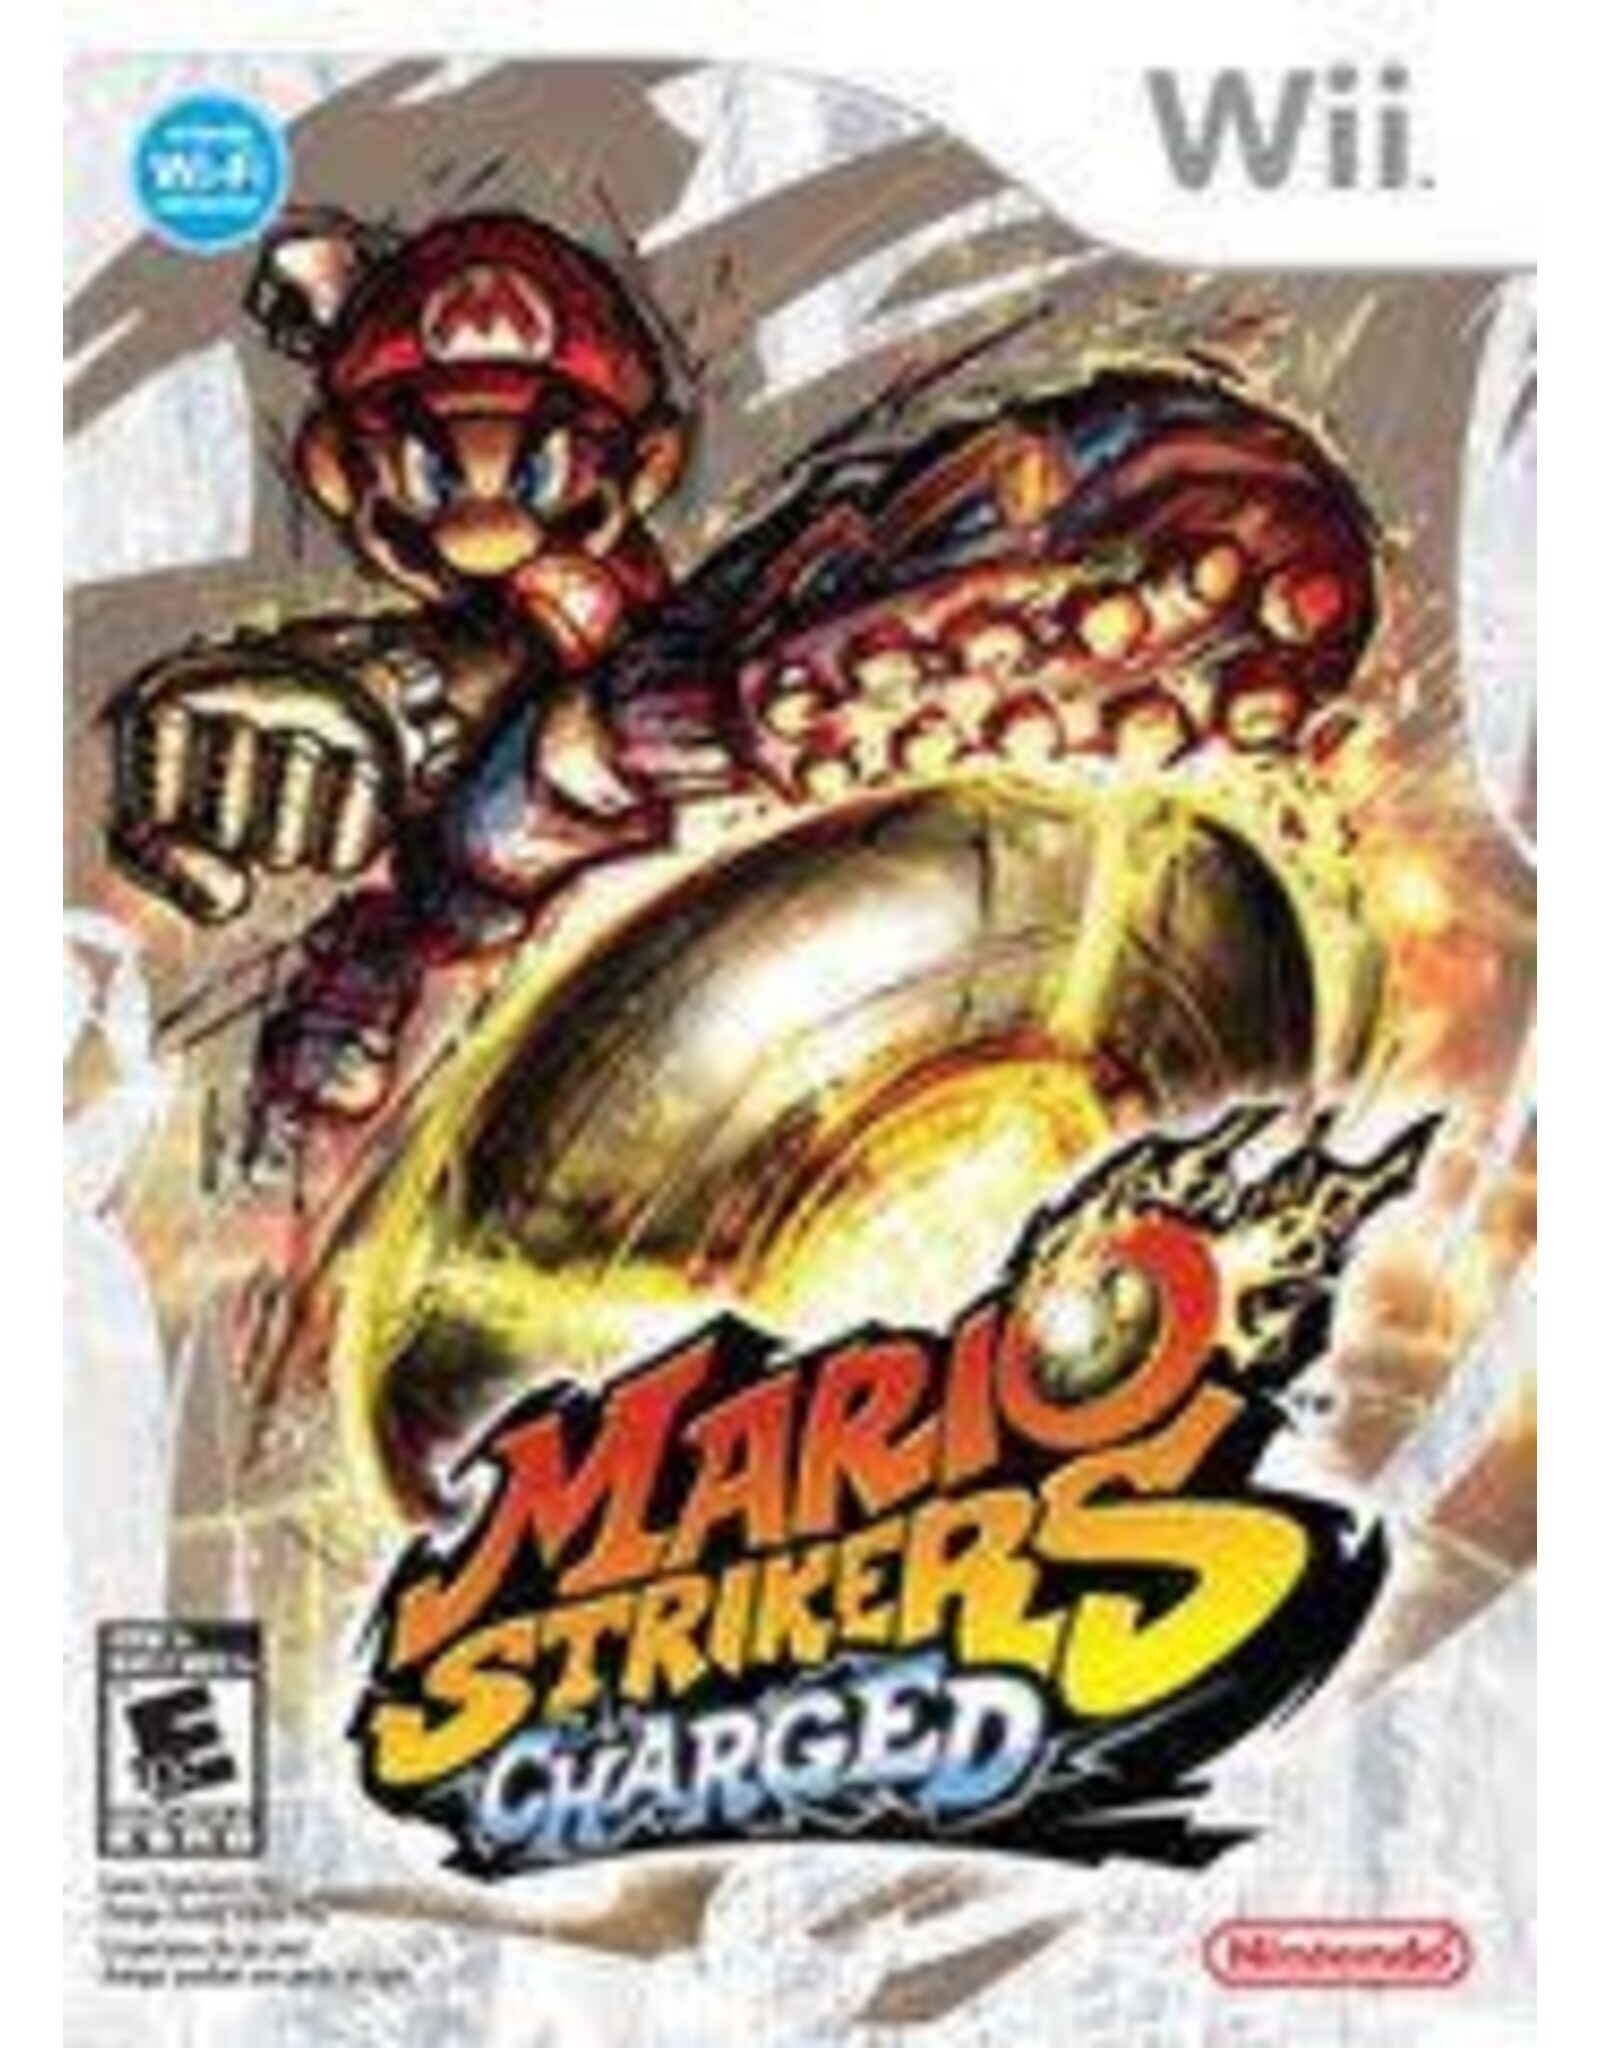 Wii Mario Strikers Charged (No Manual)